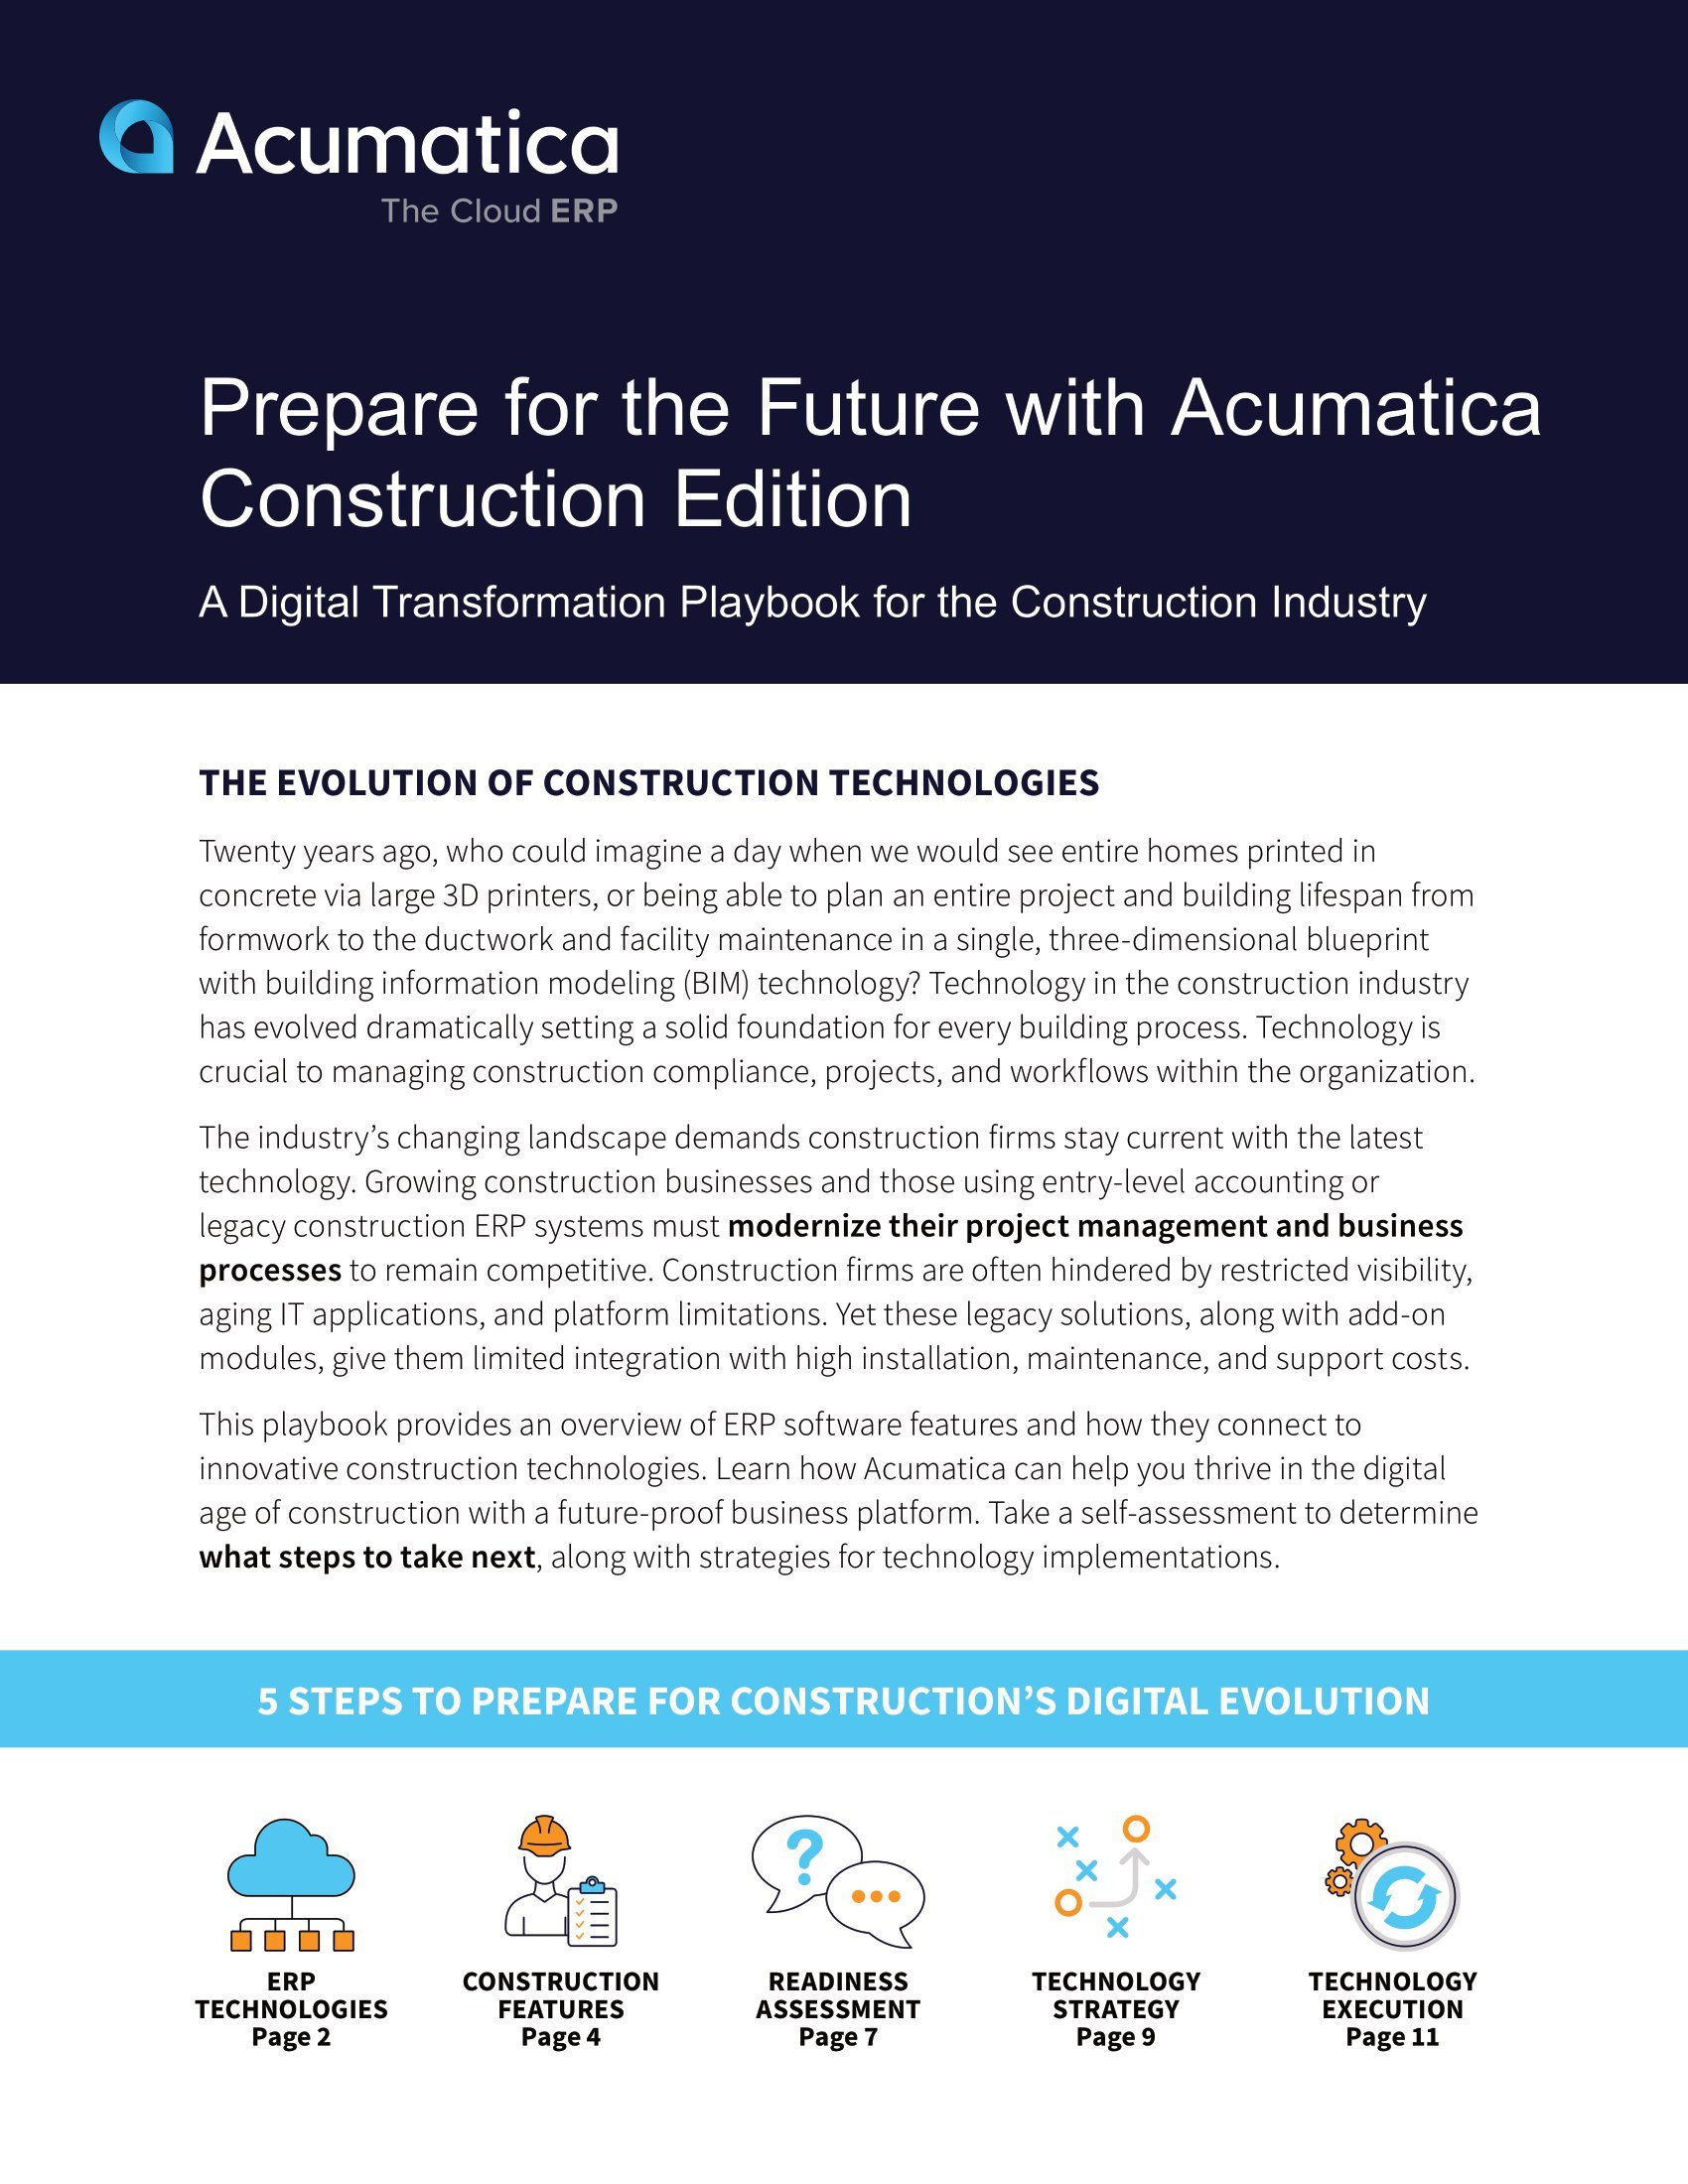 Prepare for the Construction Industry Evolution with a Digital Transformation